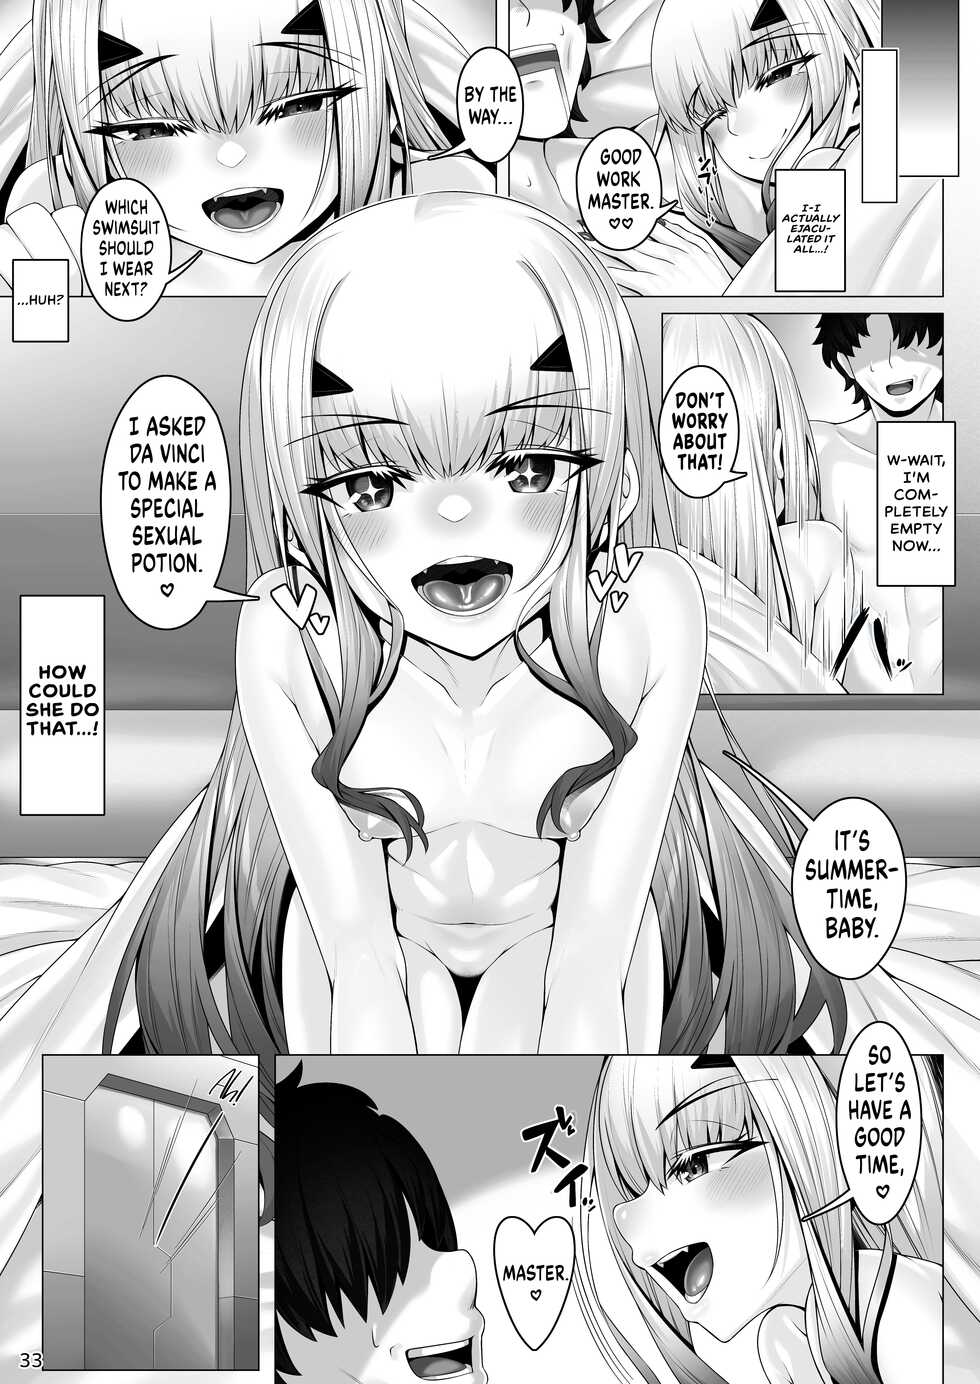 [Watochip Melonpan (Watosu)] Melusine to Motto Iroiro Ecchi Hon | Having Even More Various Types Of Sex With Melusine (Fate/Grand Order) [English] [UncontrolSwitchOverflow] [Digital] - Page 33